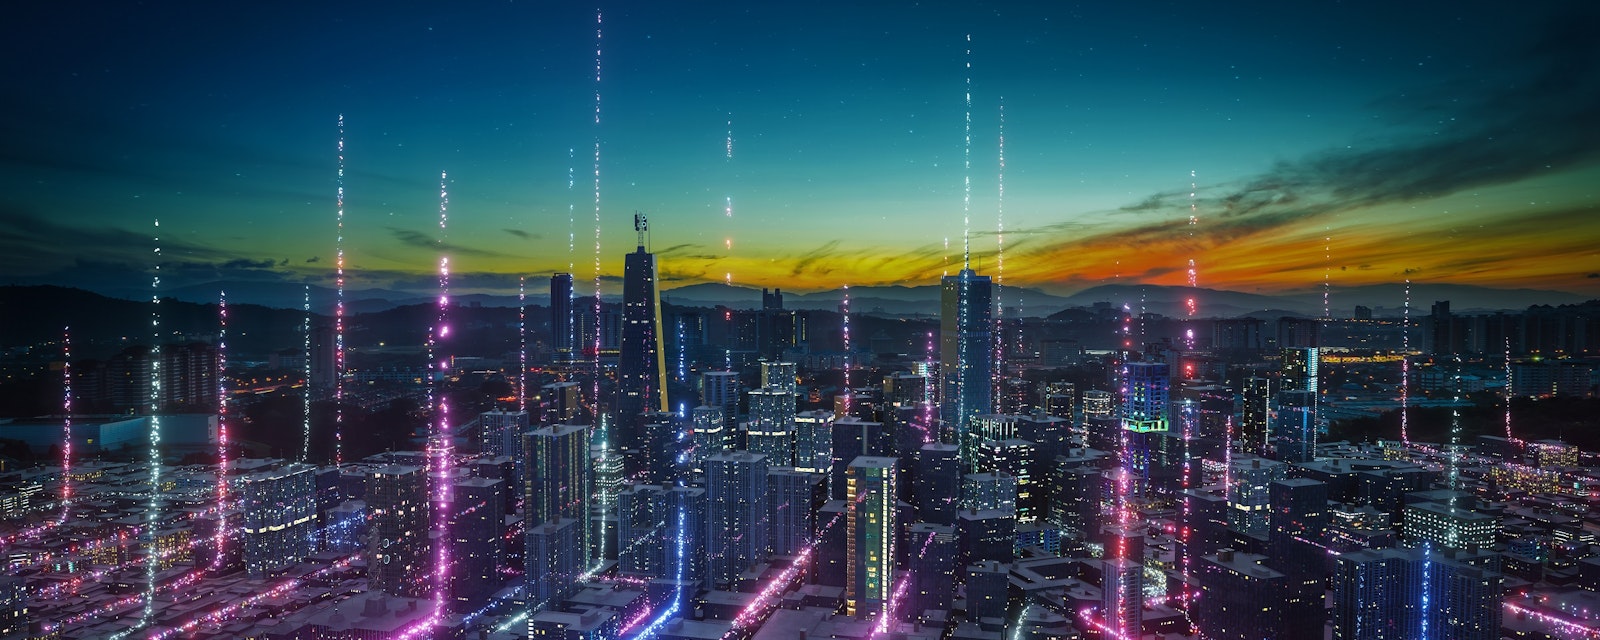 Smart,City,With,Particle,Glowing,Light,Connection,Design,,Big,Data